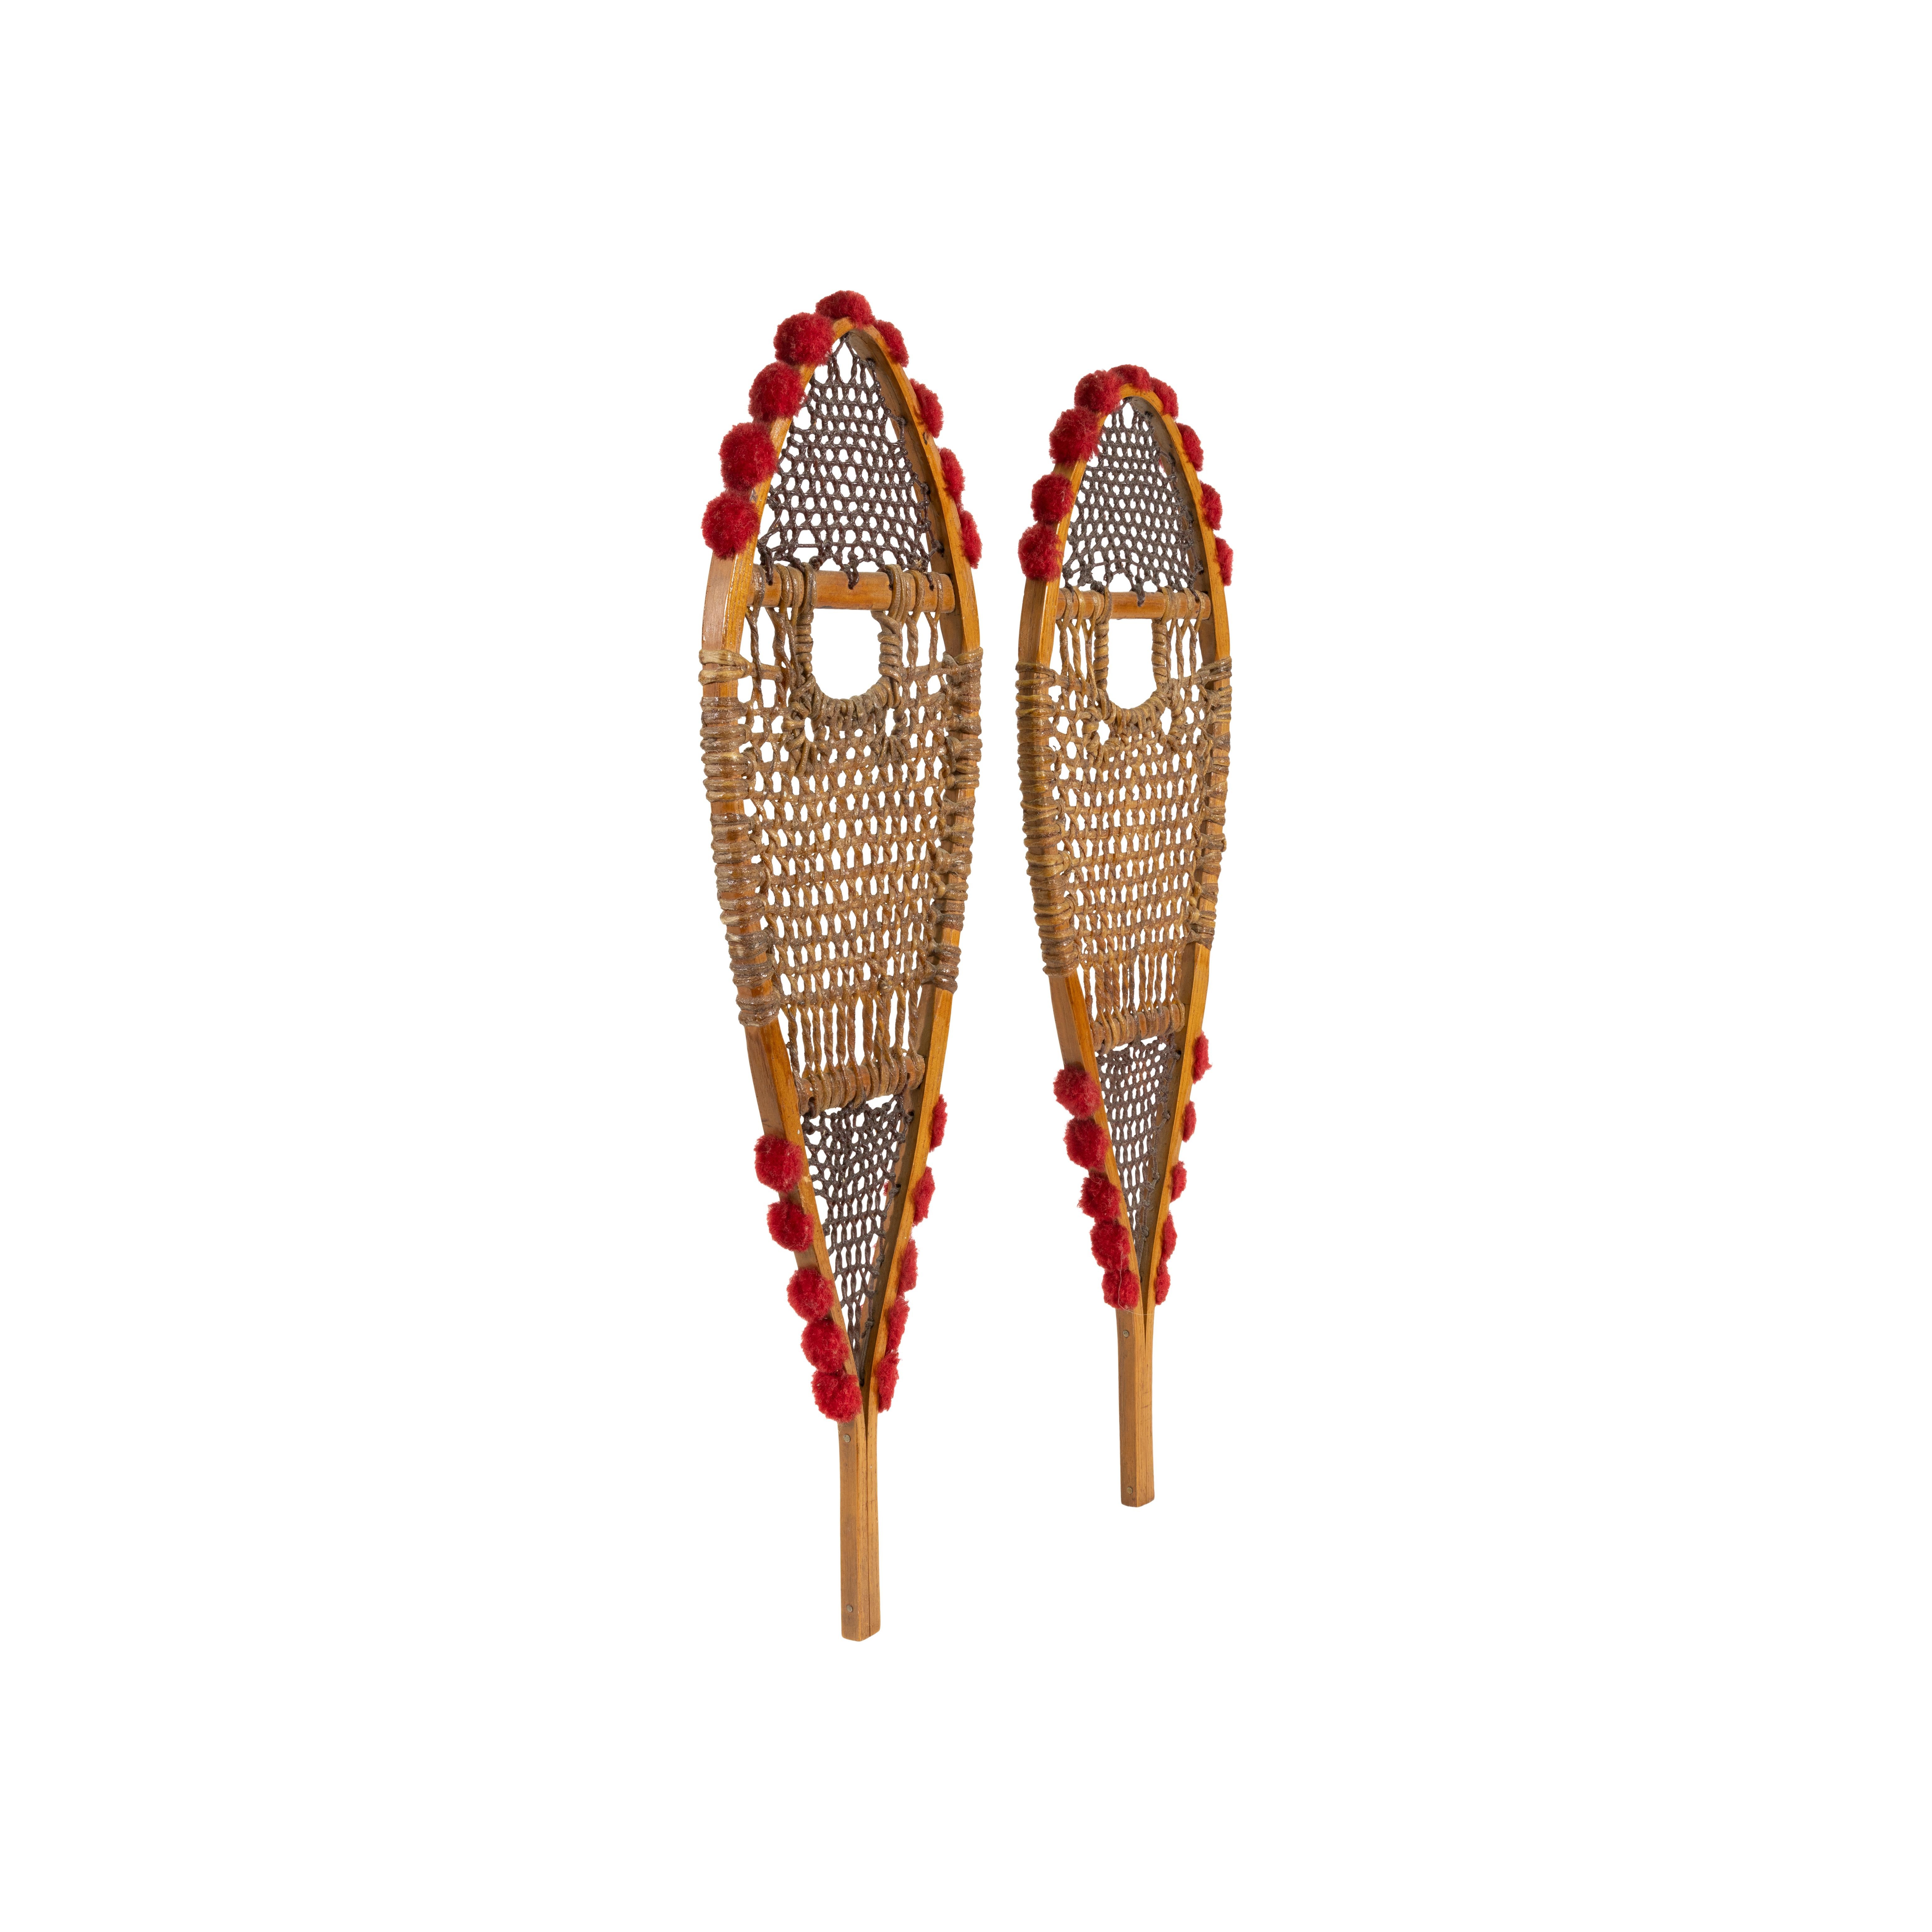 Native American Ojibwe sample snowshoes. White ash with red wool tuffs and finely woven sinew. 
PERIOD: Early 20th Century
ORIGIN: Northeast - Ojibwe, Native American
SIZE: 16